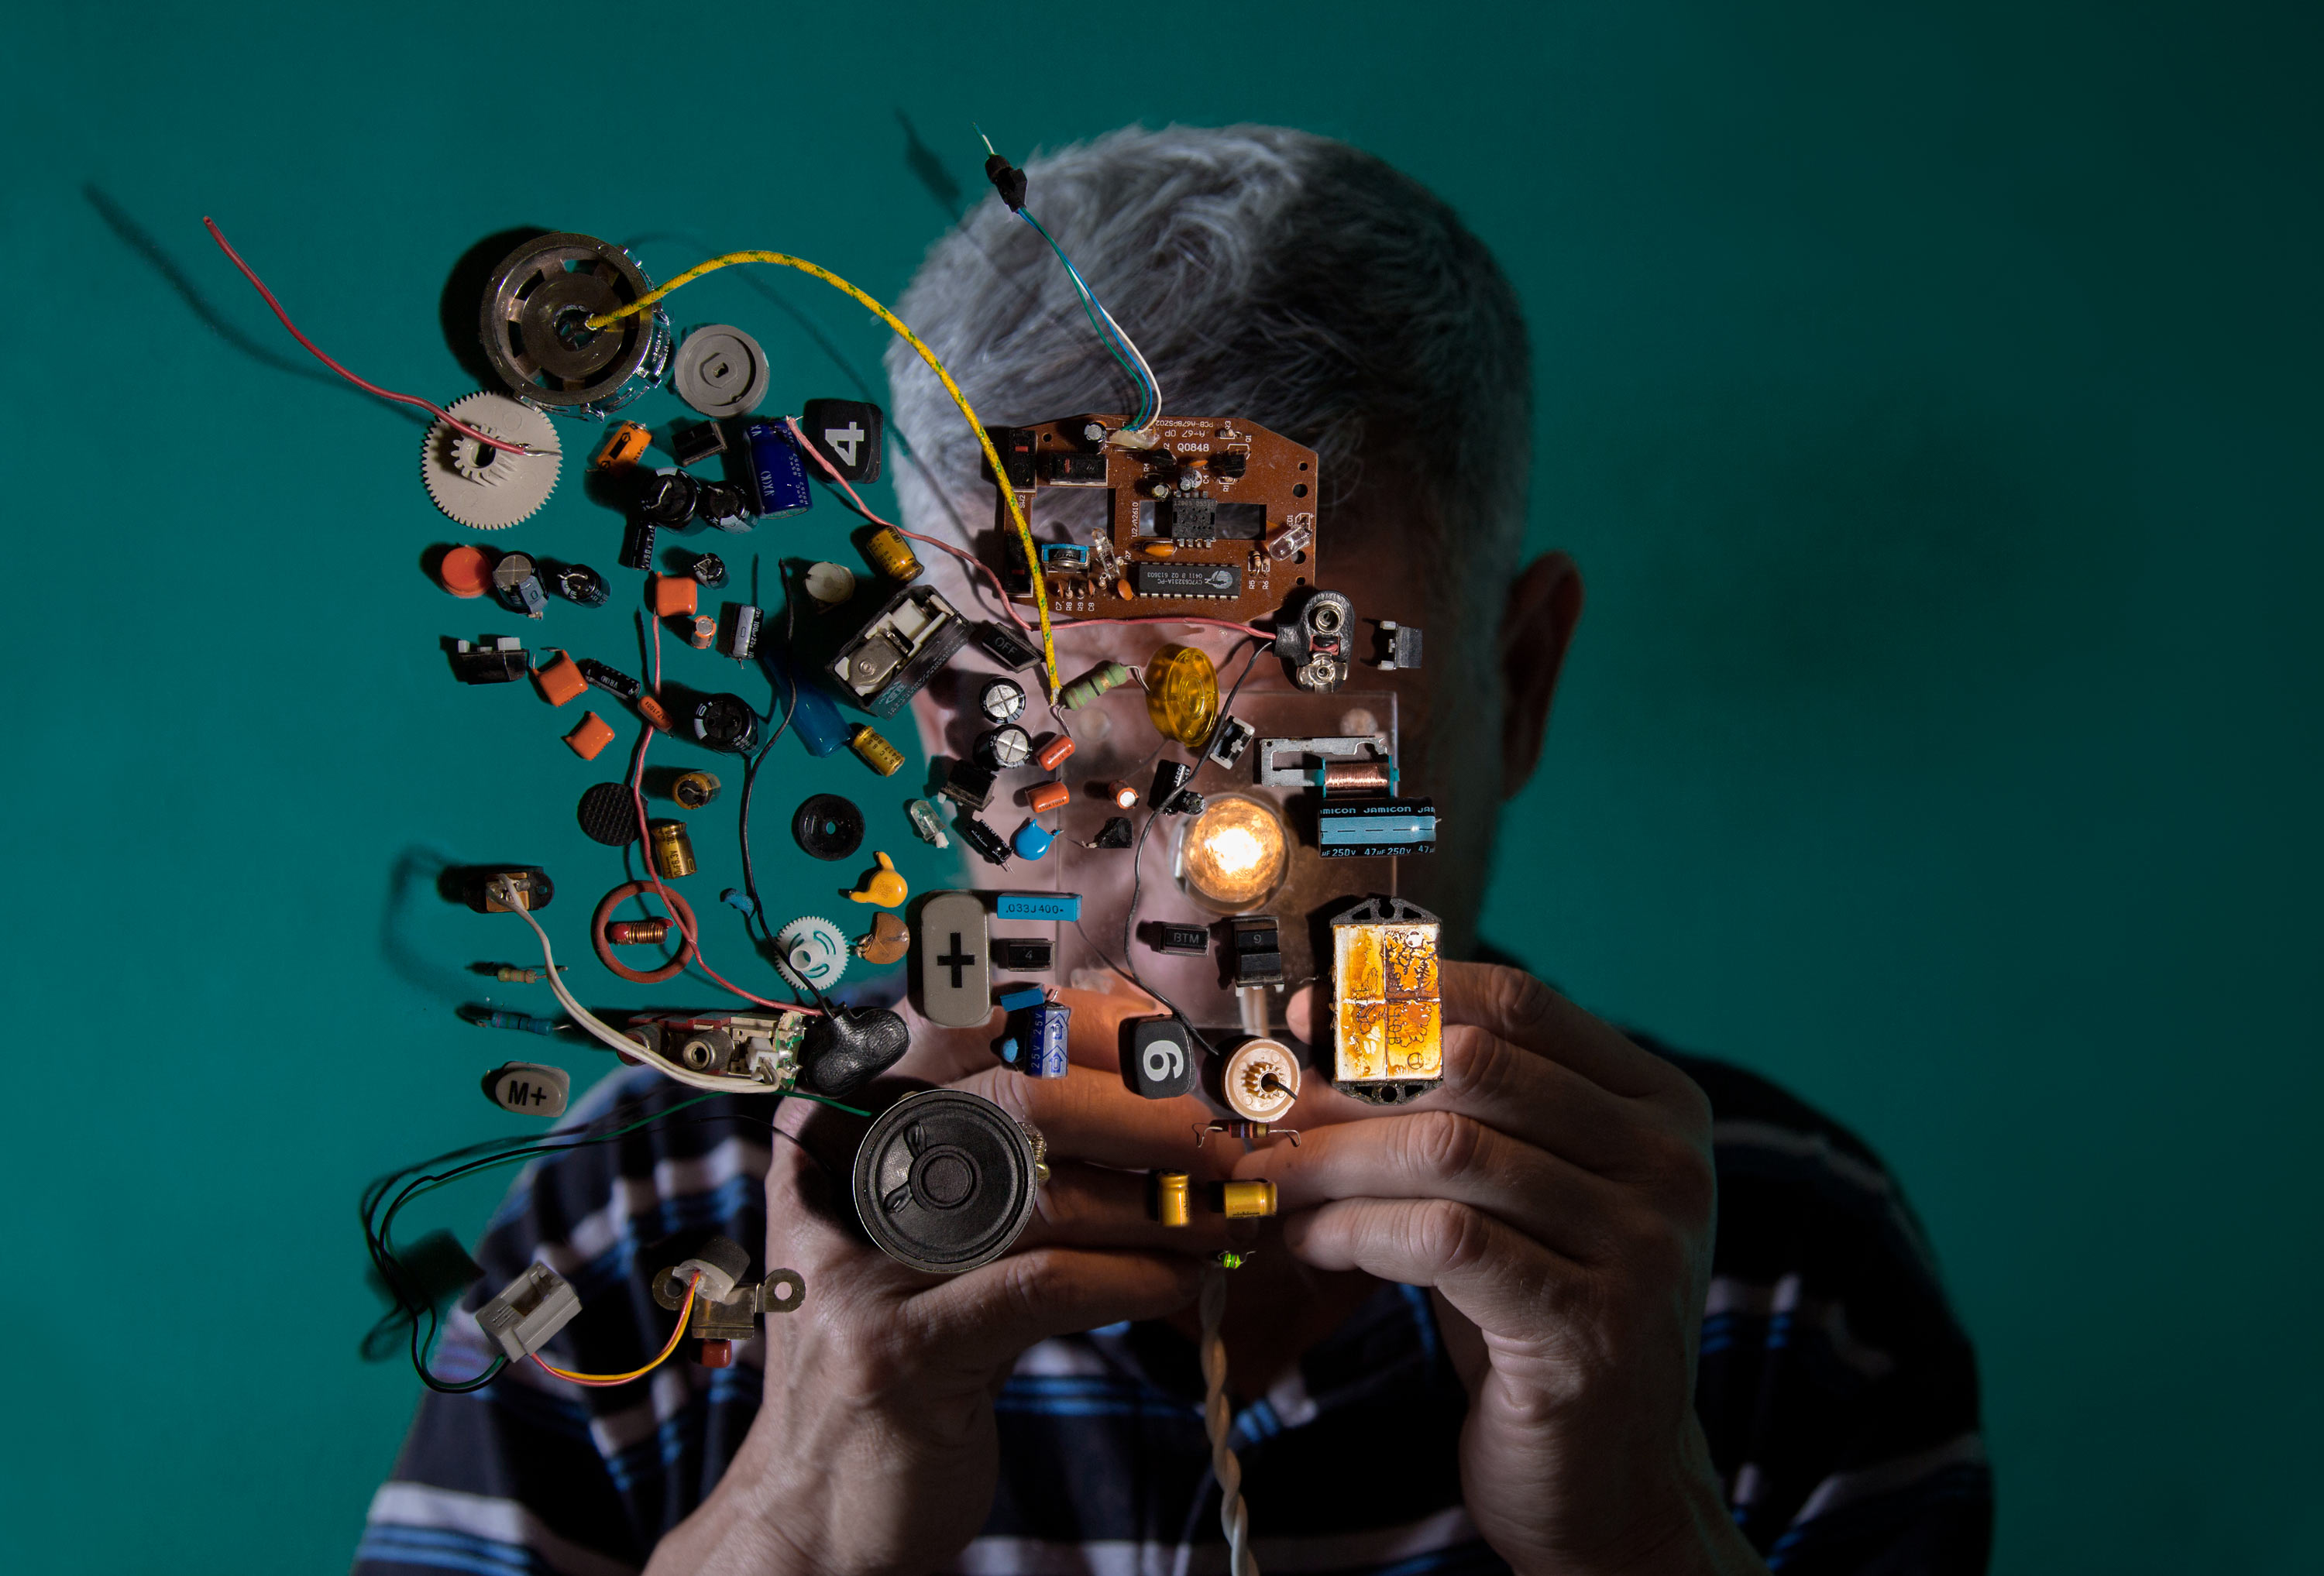 A portrait of the photographer’s uncle looking at electrical equipment.